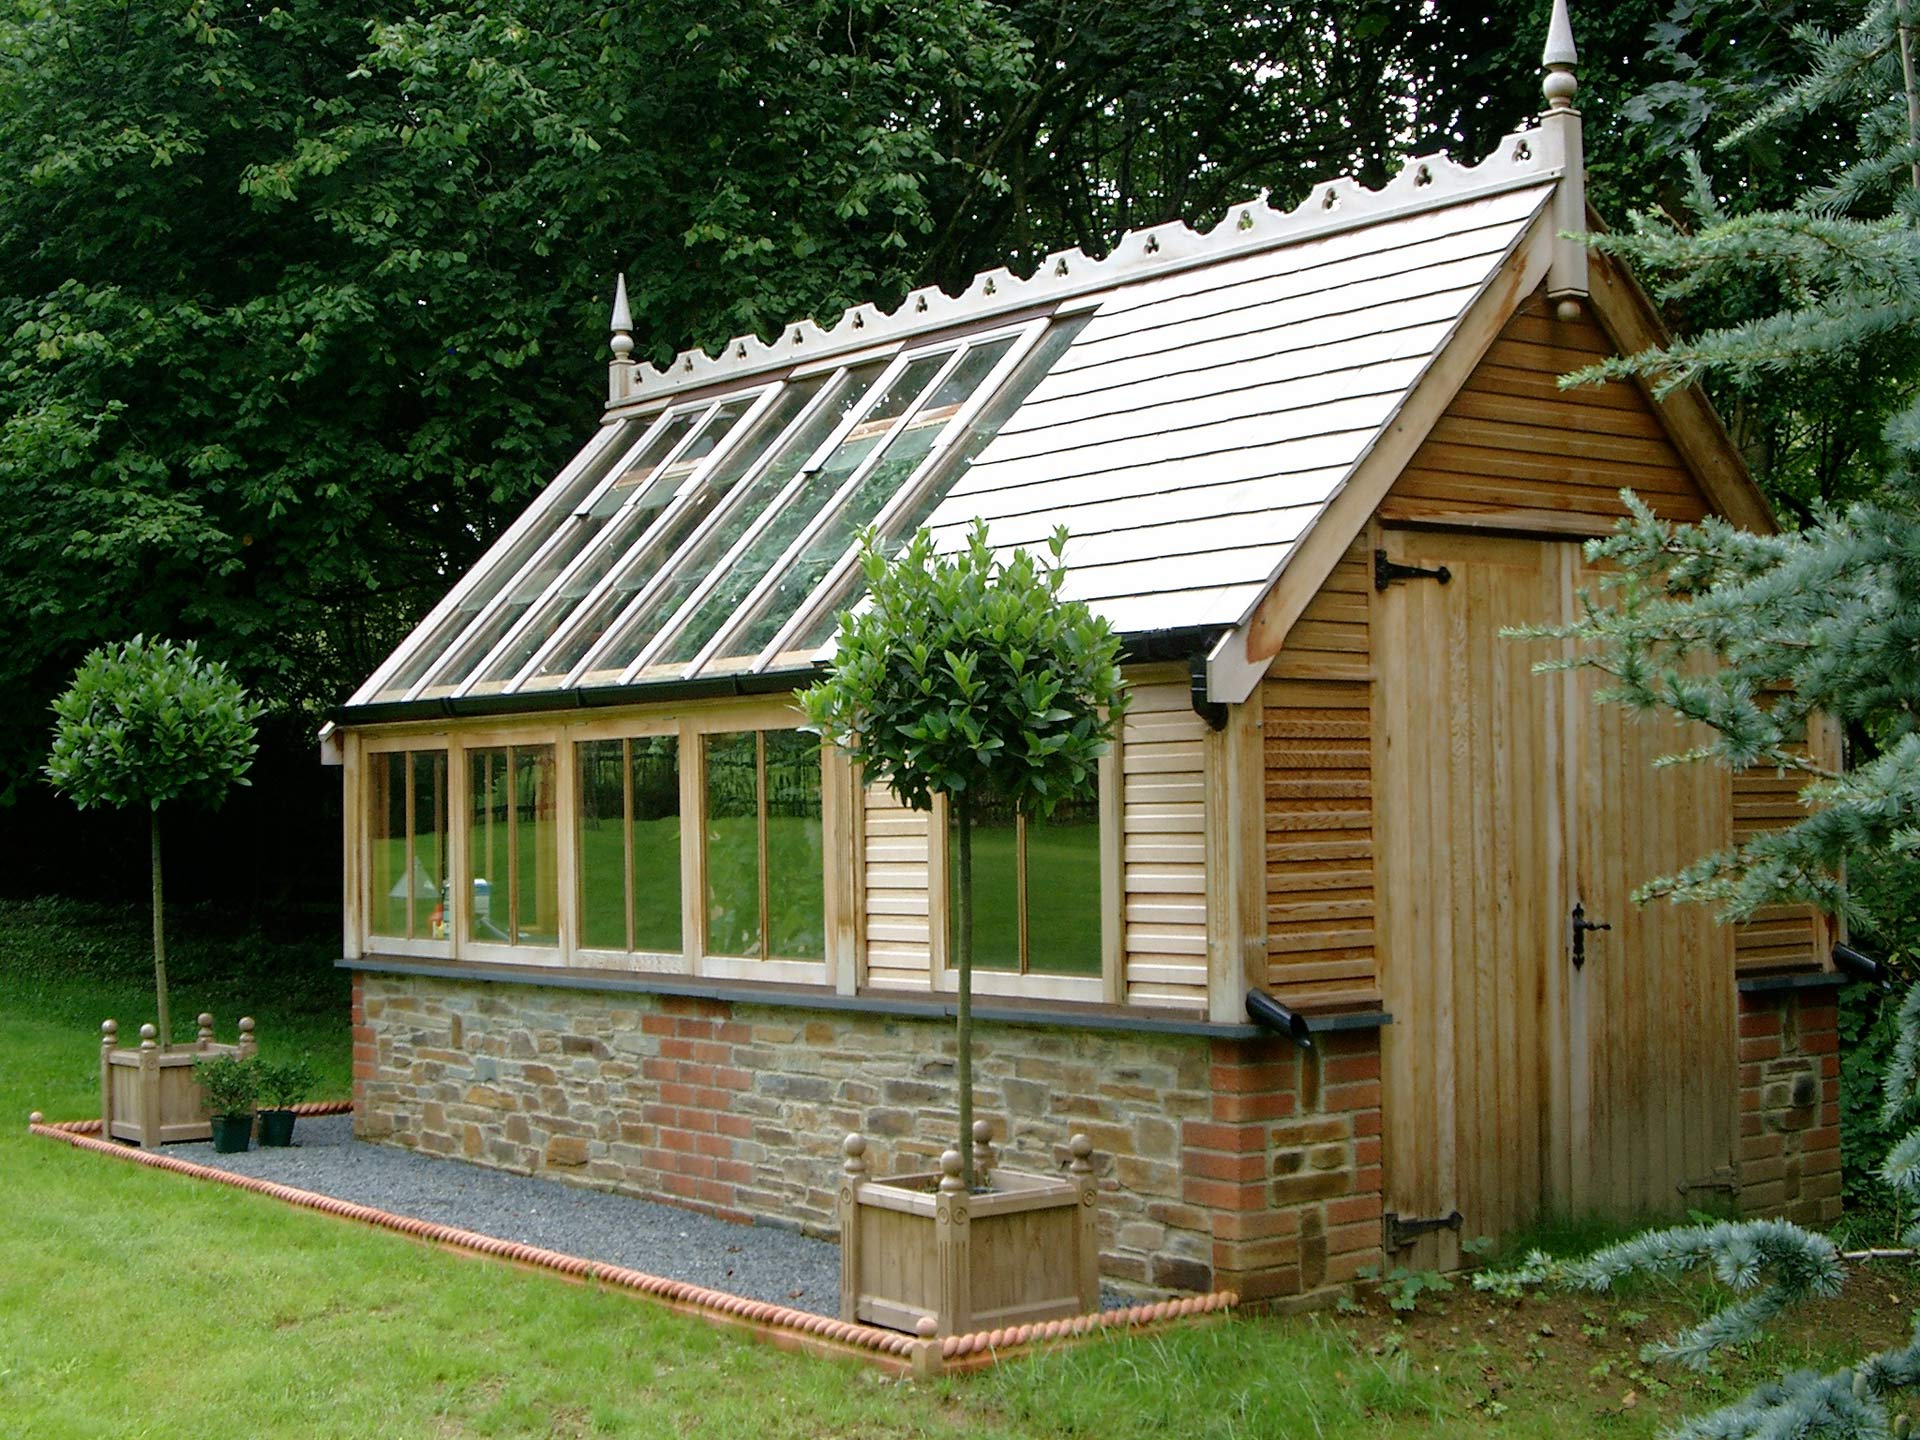 Optional double doors to potting shed.